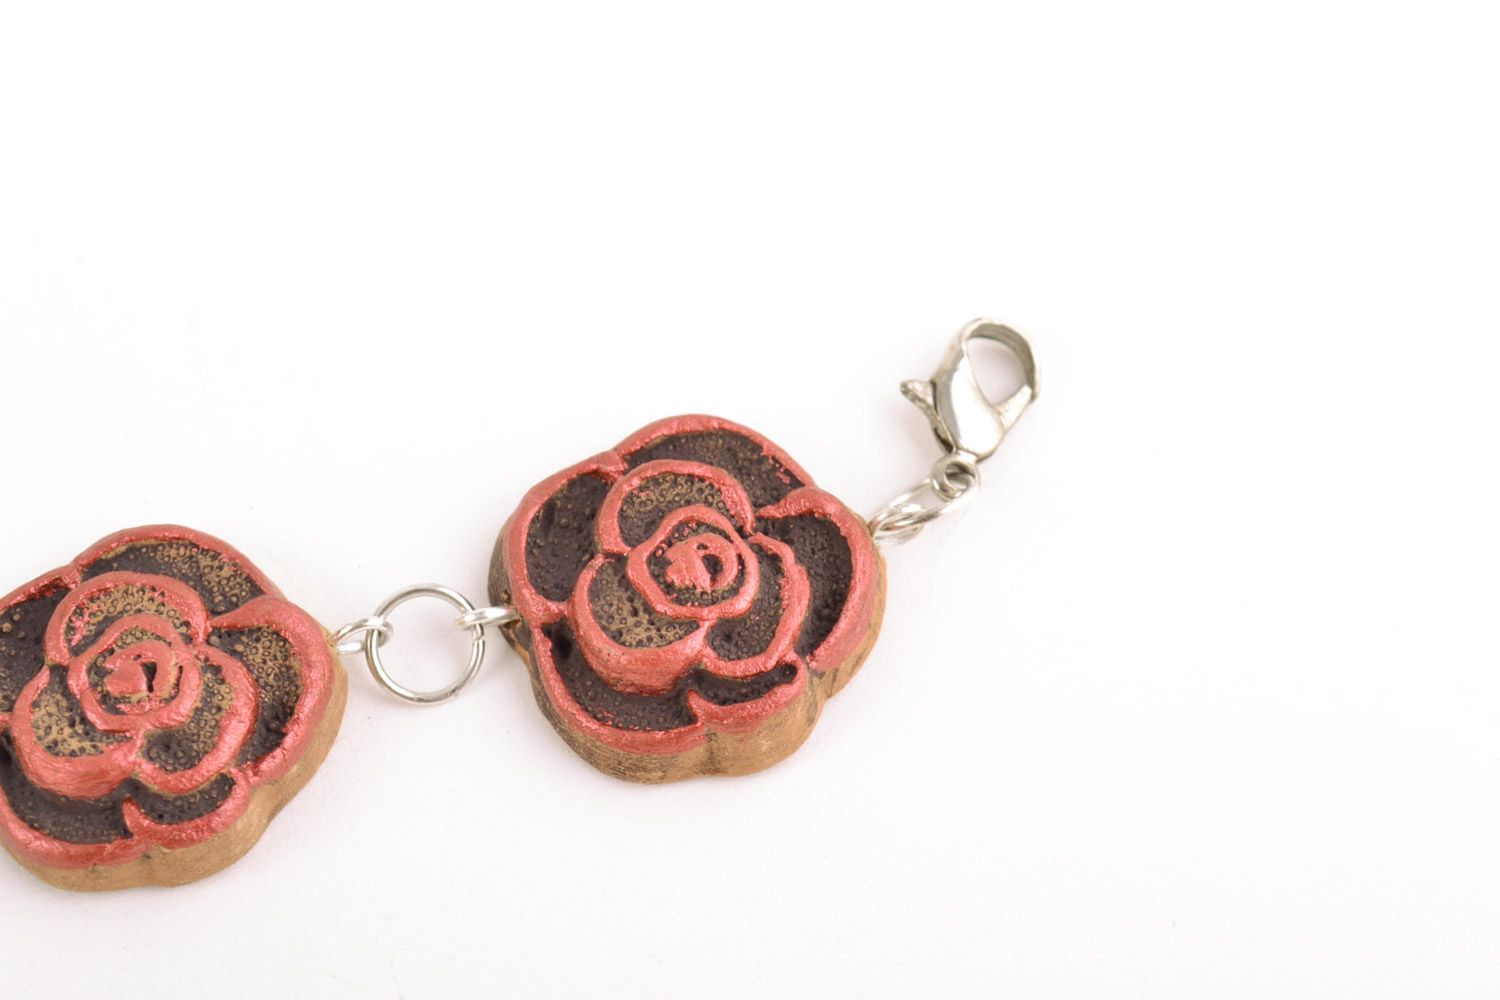 Handmade ethnic wrist bracelet on chain with painted ceramic floral elements photo 4